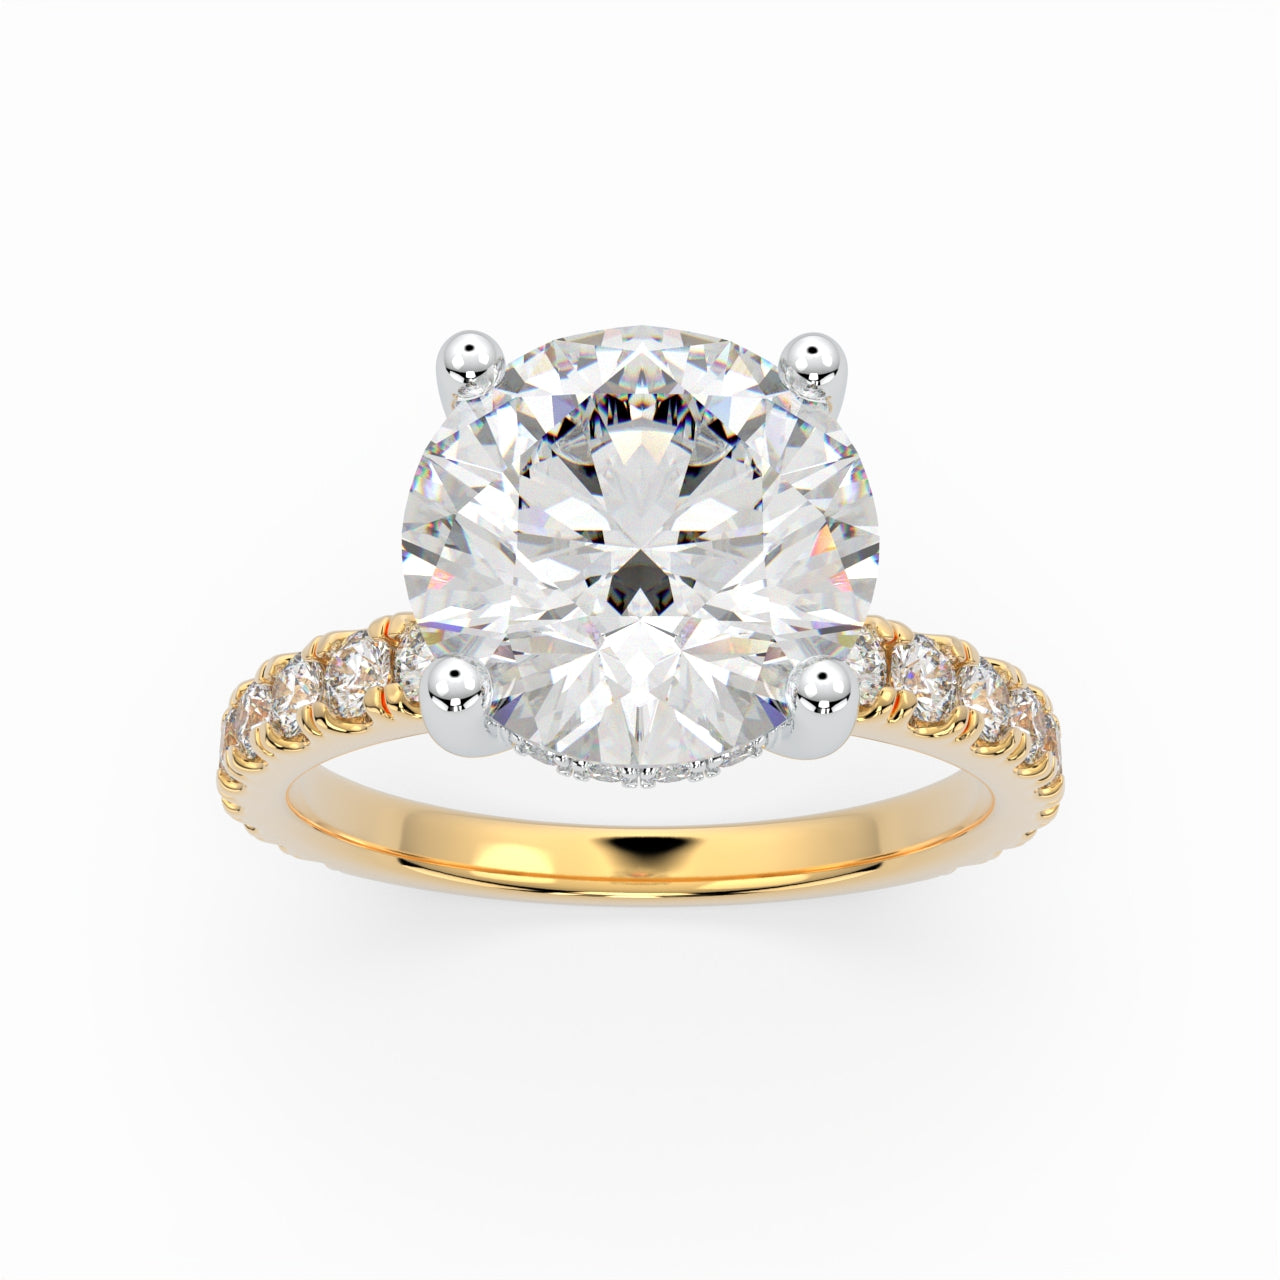 Round Cut Solitaire Cathedral Engagement Ring with diamonds on band LR017R